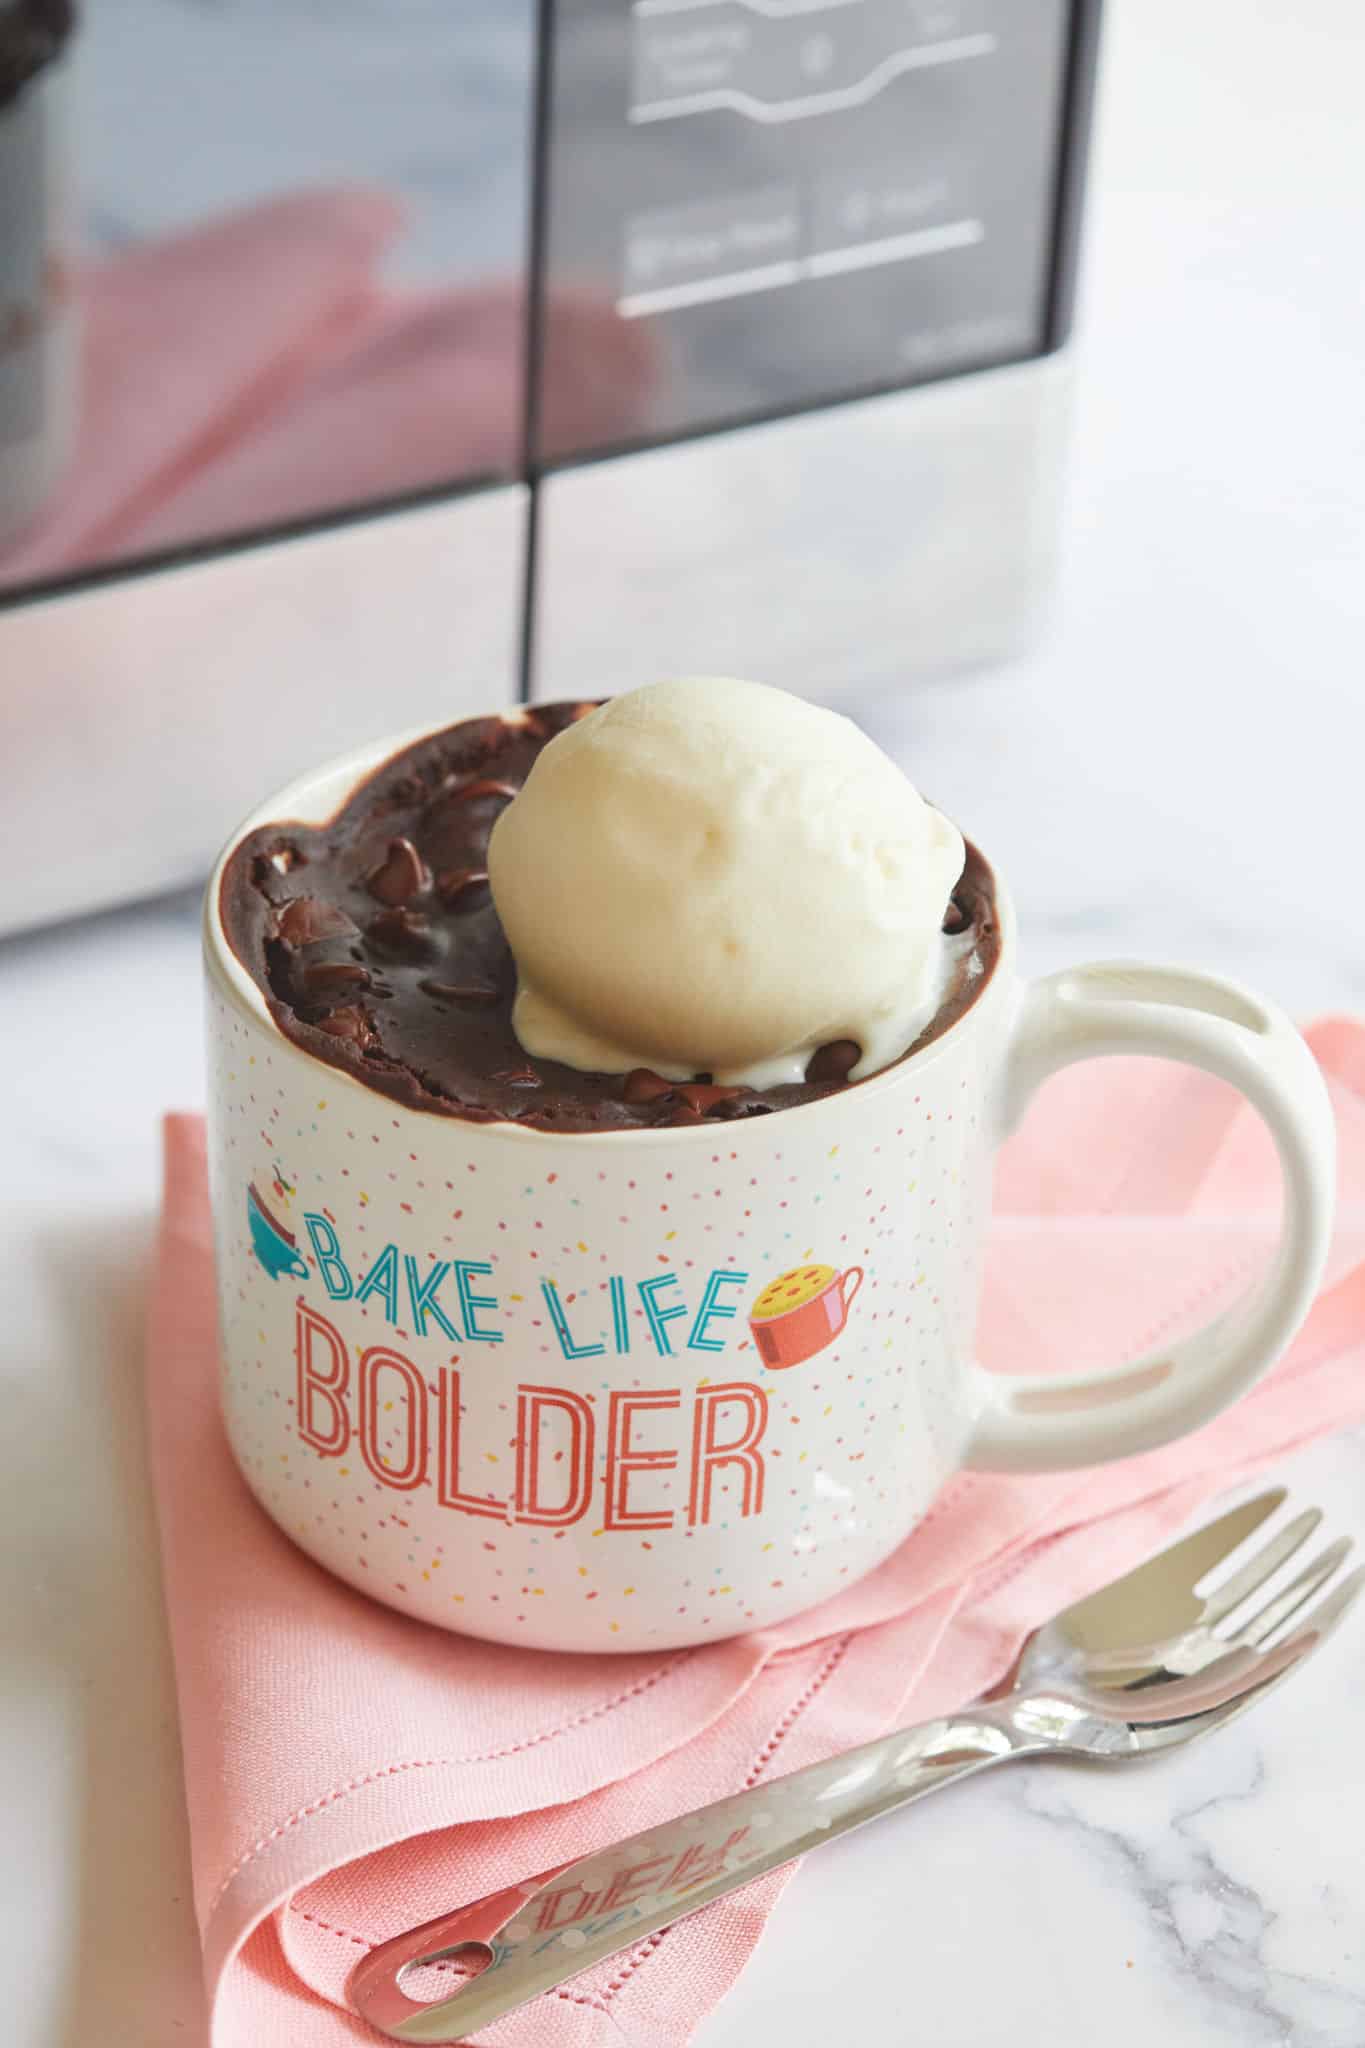 A brownie made in the microwave, sitting on a pink napkin and topped with ice cream.